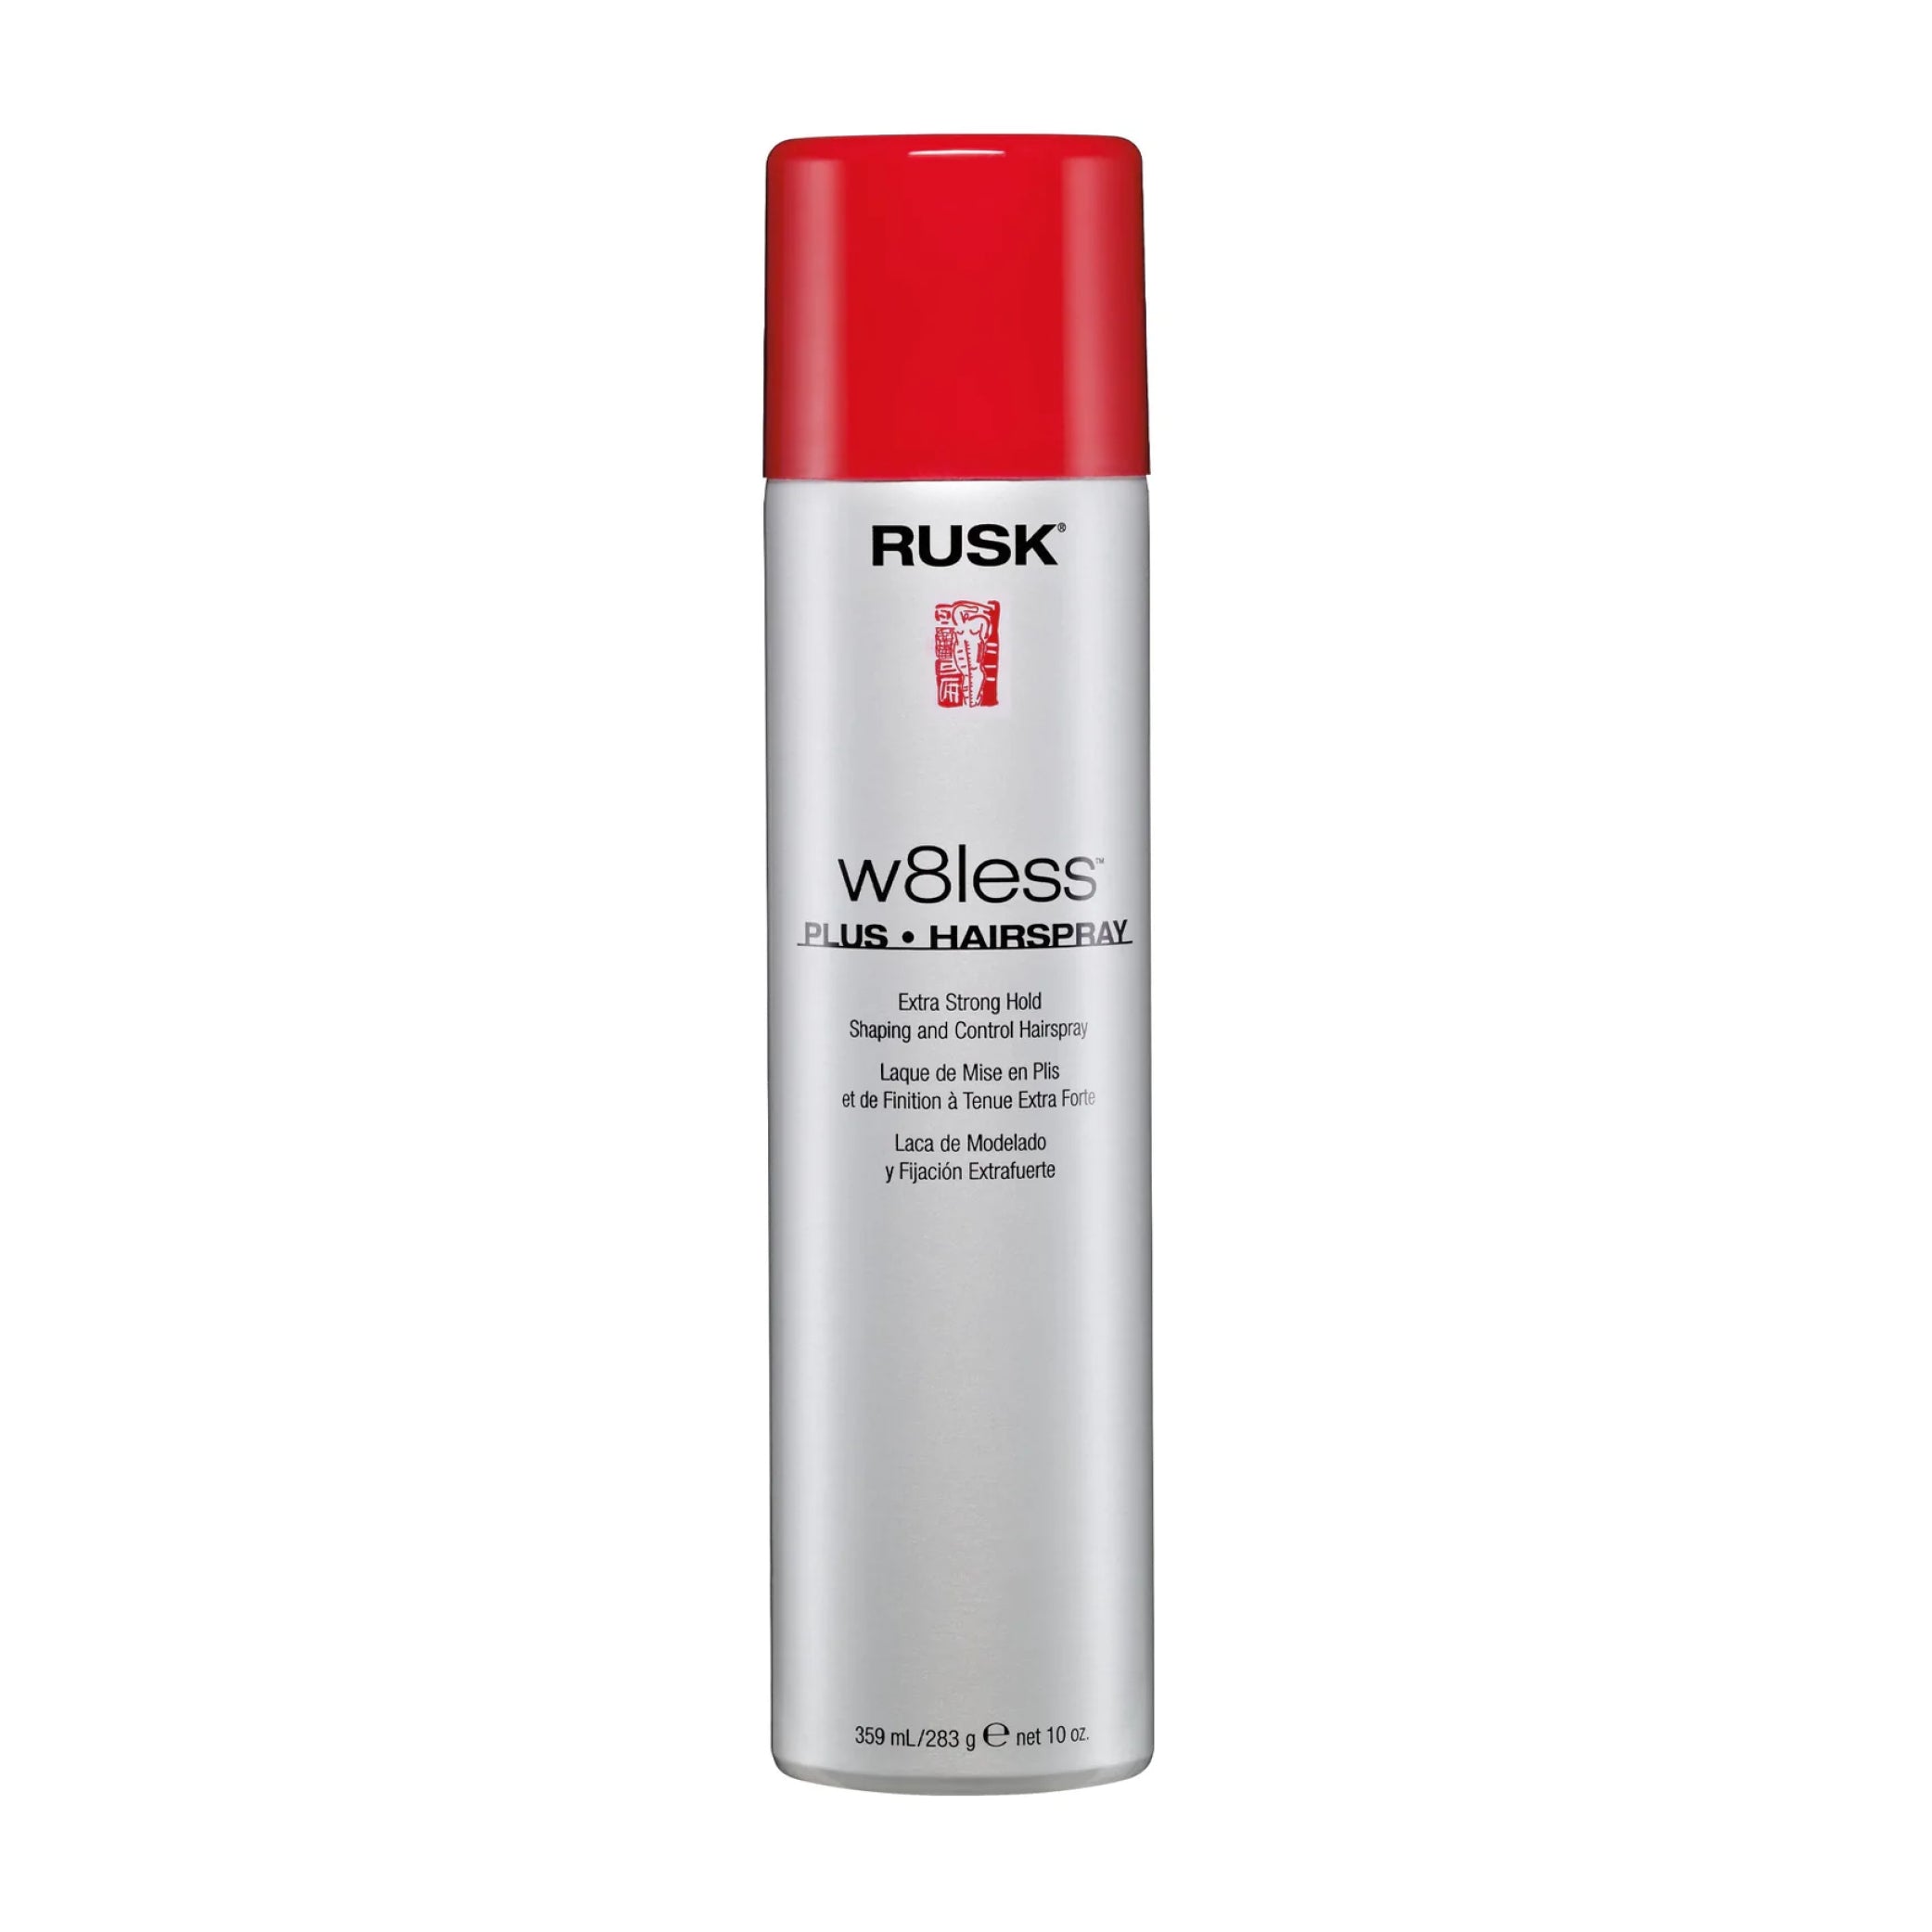 W8less Plus - Extra Strong Hold Hairspray